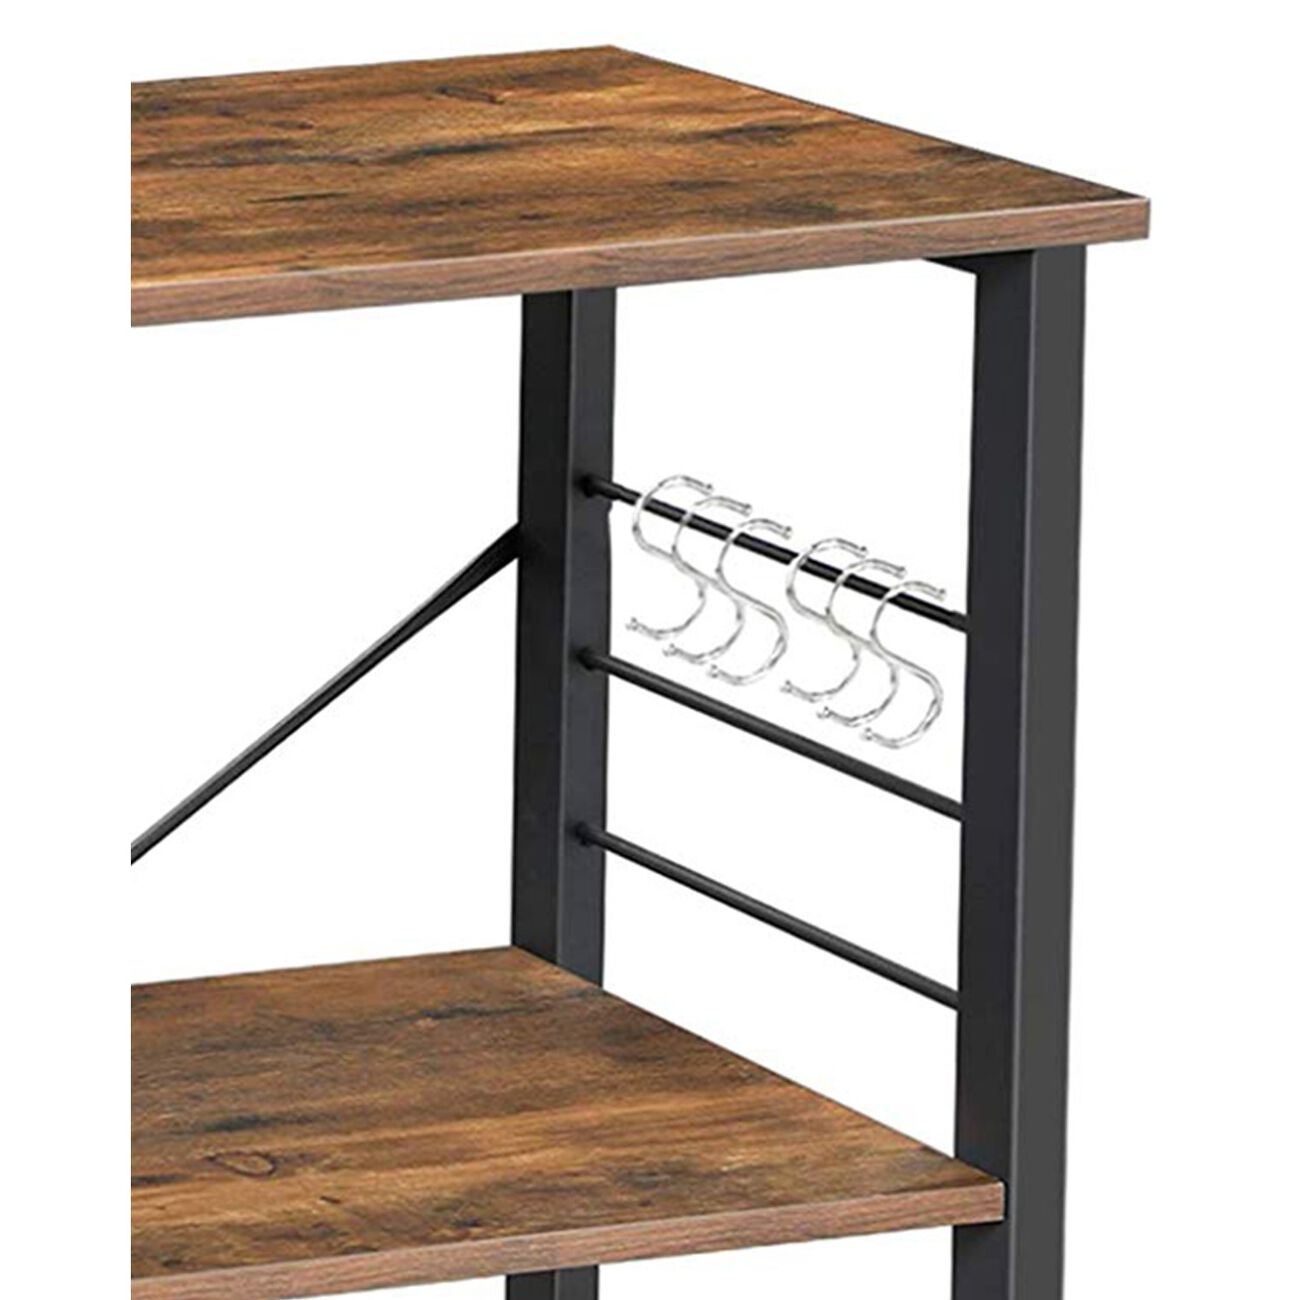 3 Tier Wood and Metal Kitchen Cart with Casters, Rustic Brown and Black